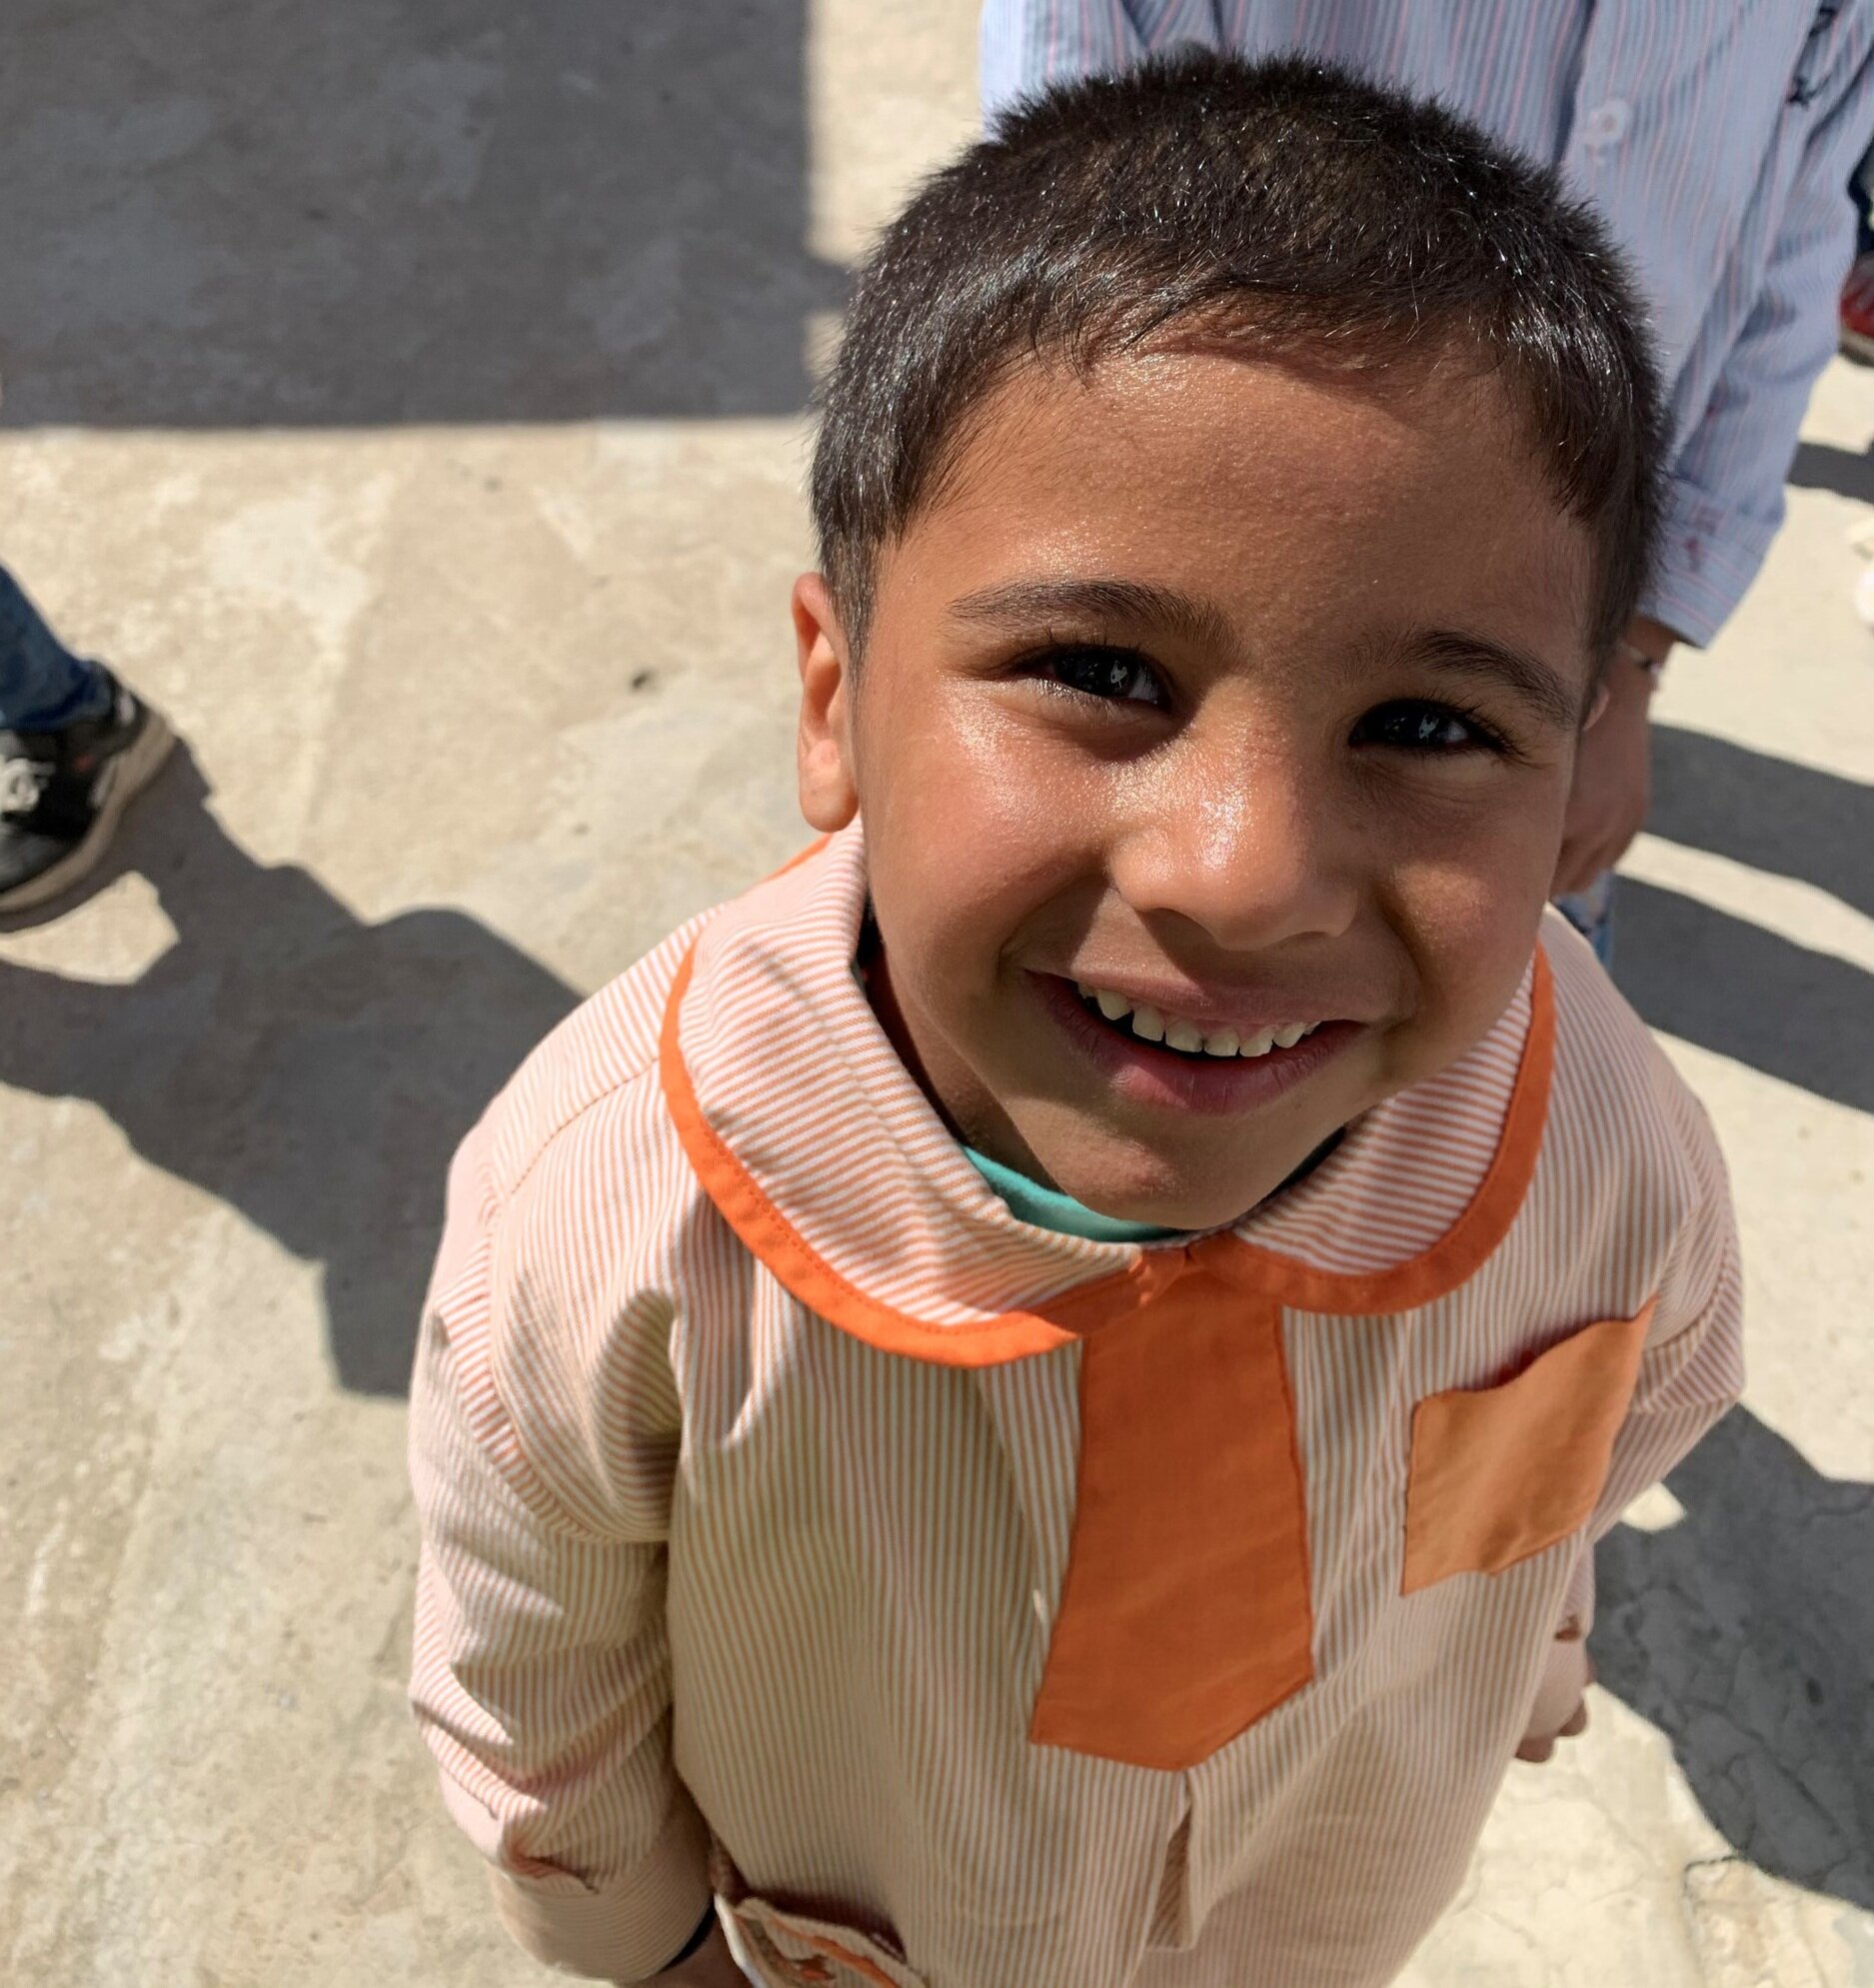 Syrian refugees, like this little one, eagerly await the reopening of the schools run by our Presbyterian family